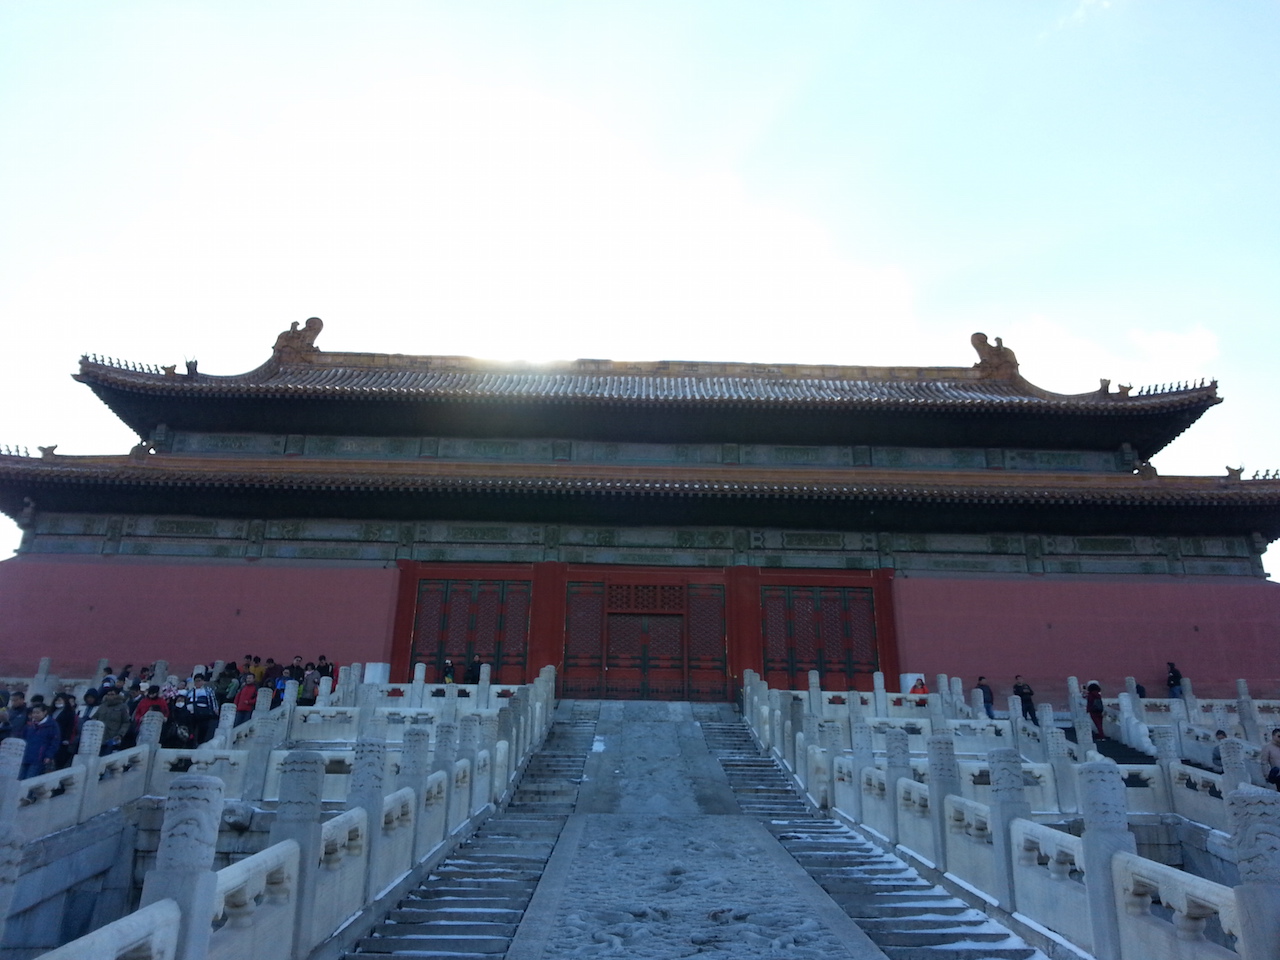 The north end of a Forbidden City Palace